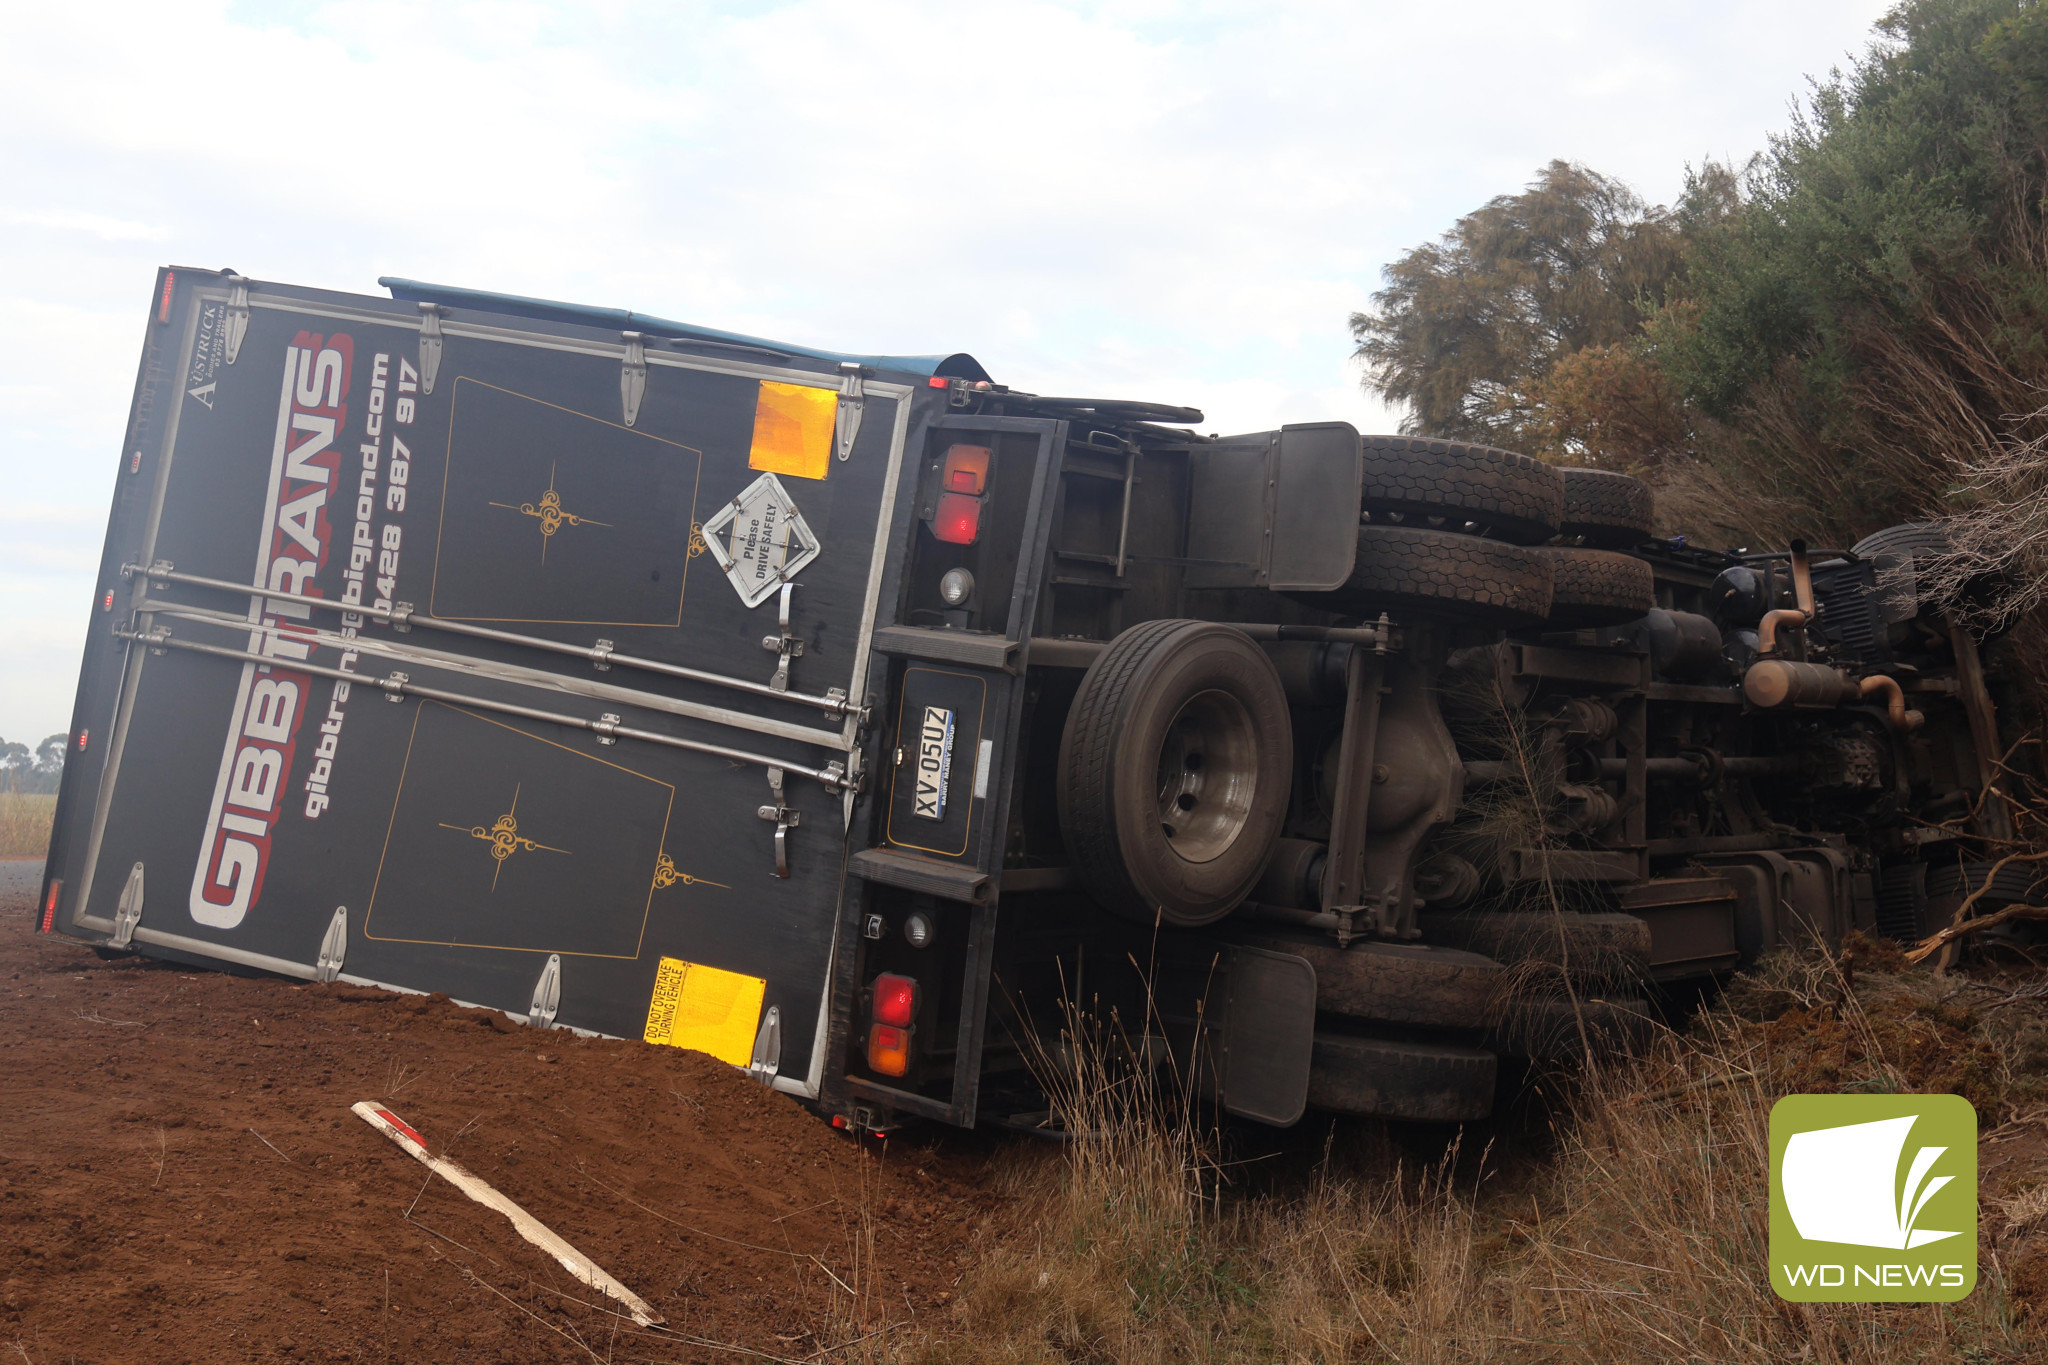 Lucky escape: A truck driver has avoided injury after a mob of Kangaroos on the road caused damage to the vehicle, resulting in a loss of control.